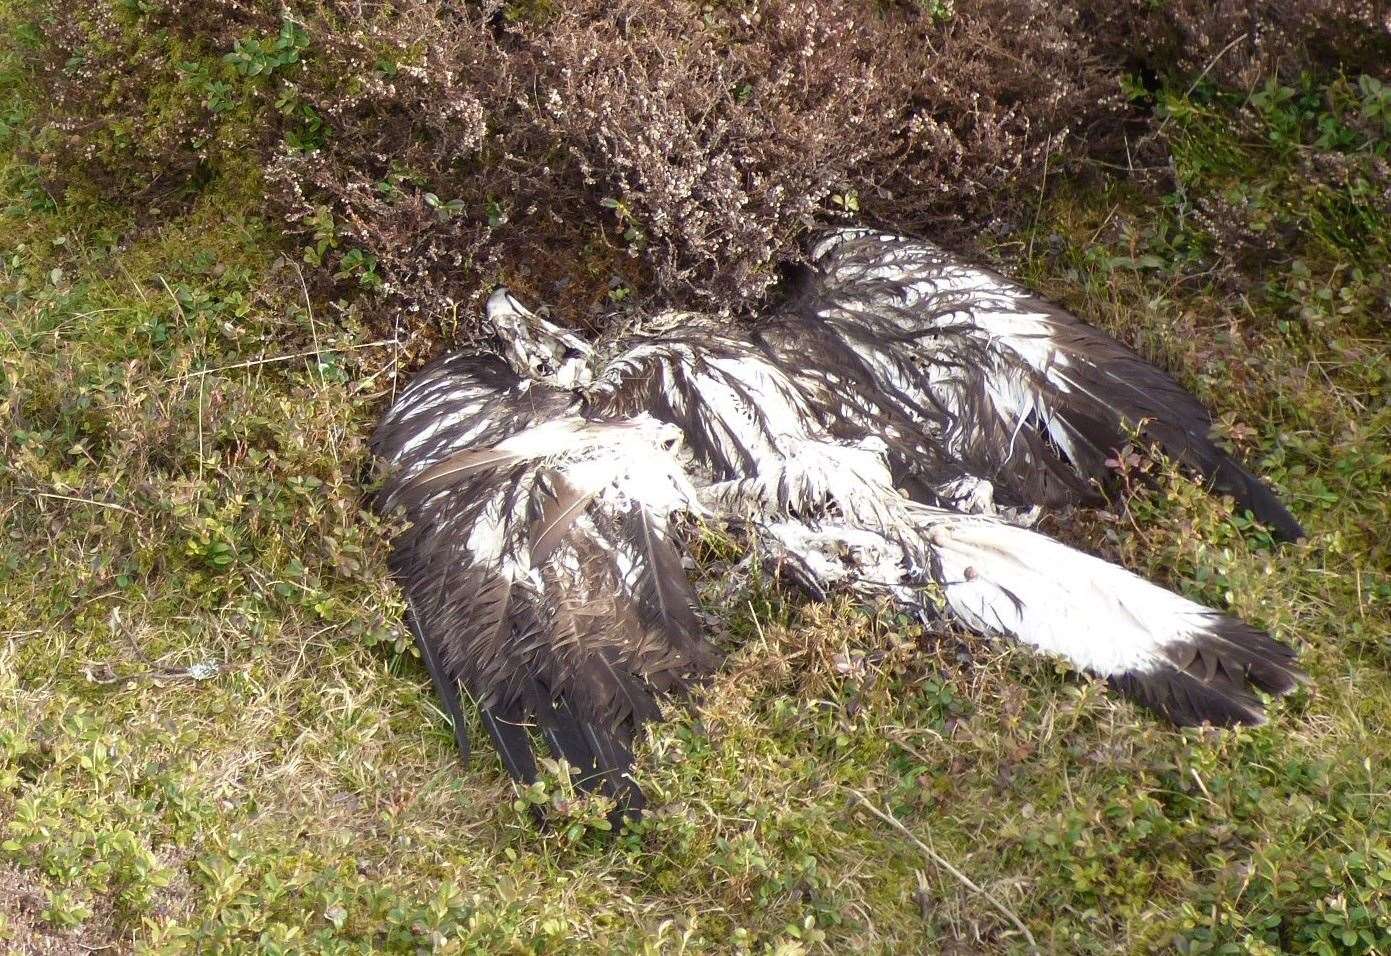 Cairngorms authority condemns 'senseless' killing of golden eagle on its patch